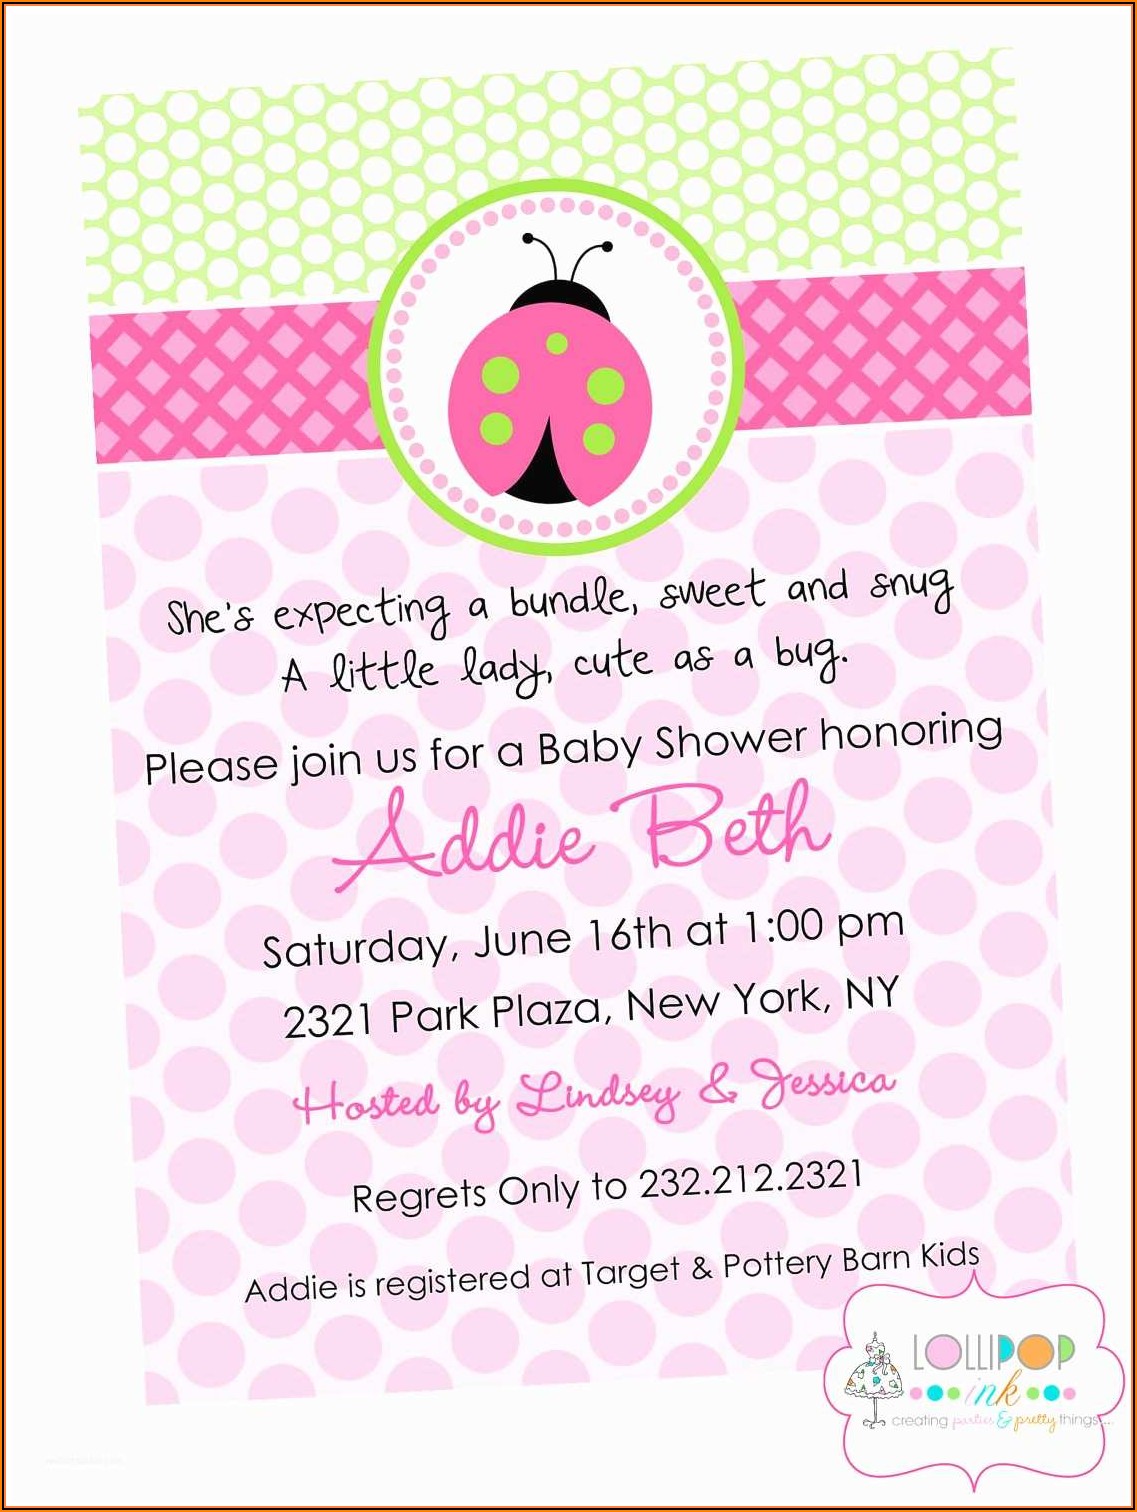 Invitation Cards Designs For Baby Shower